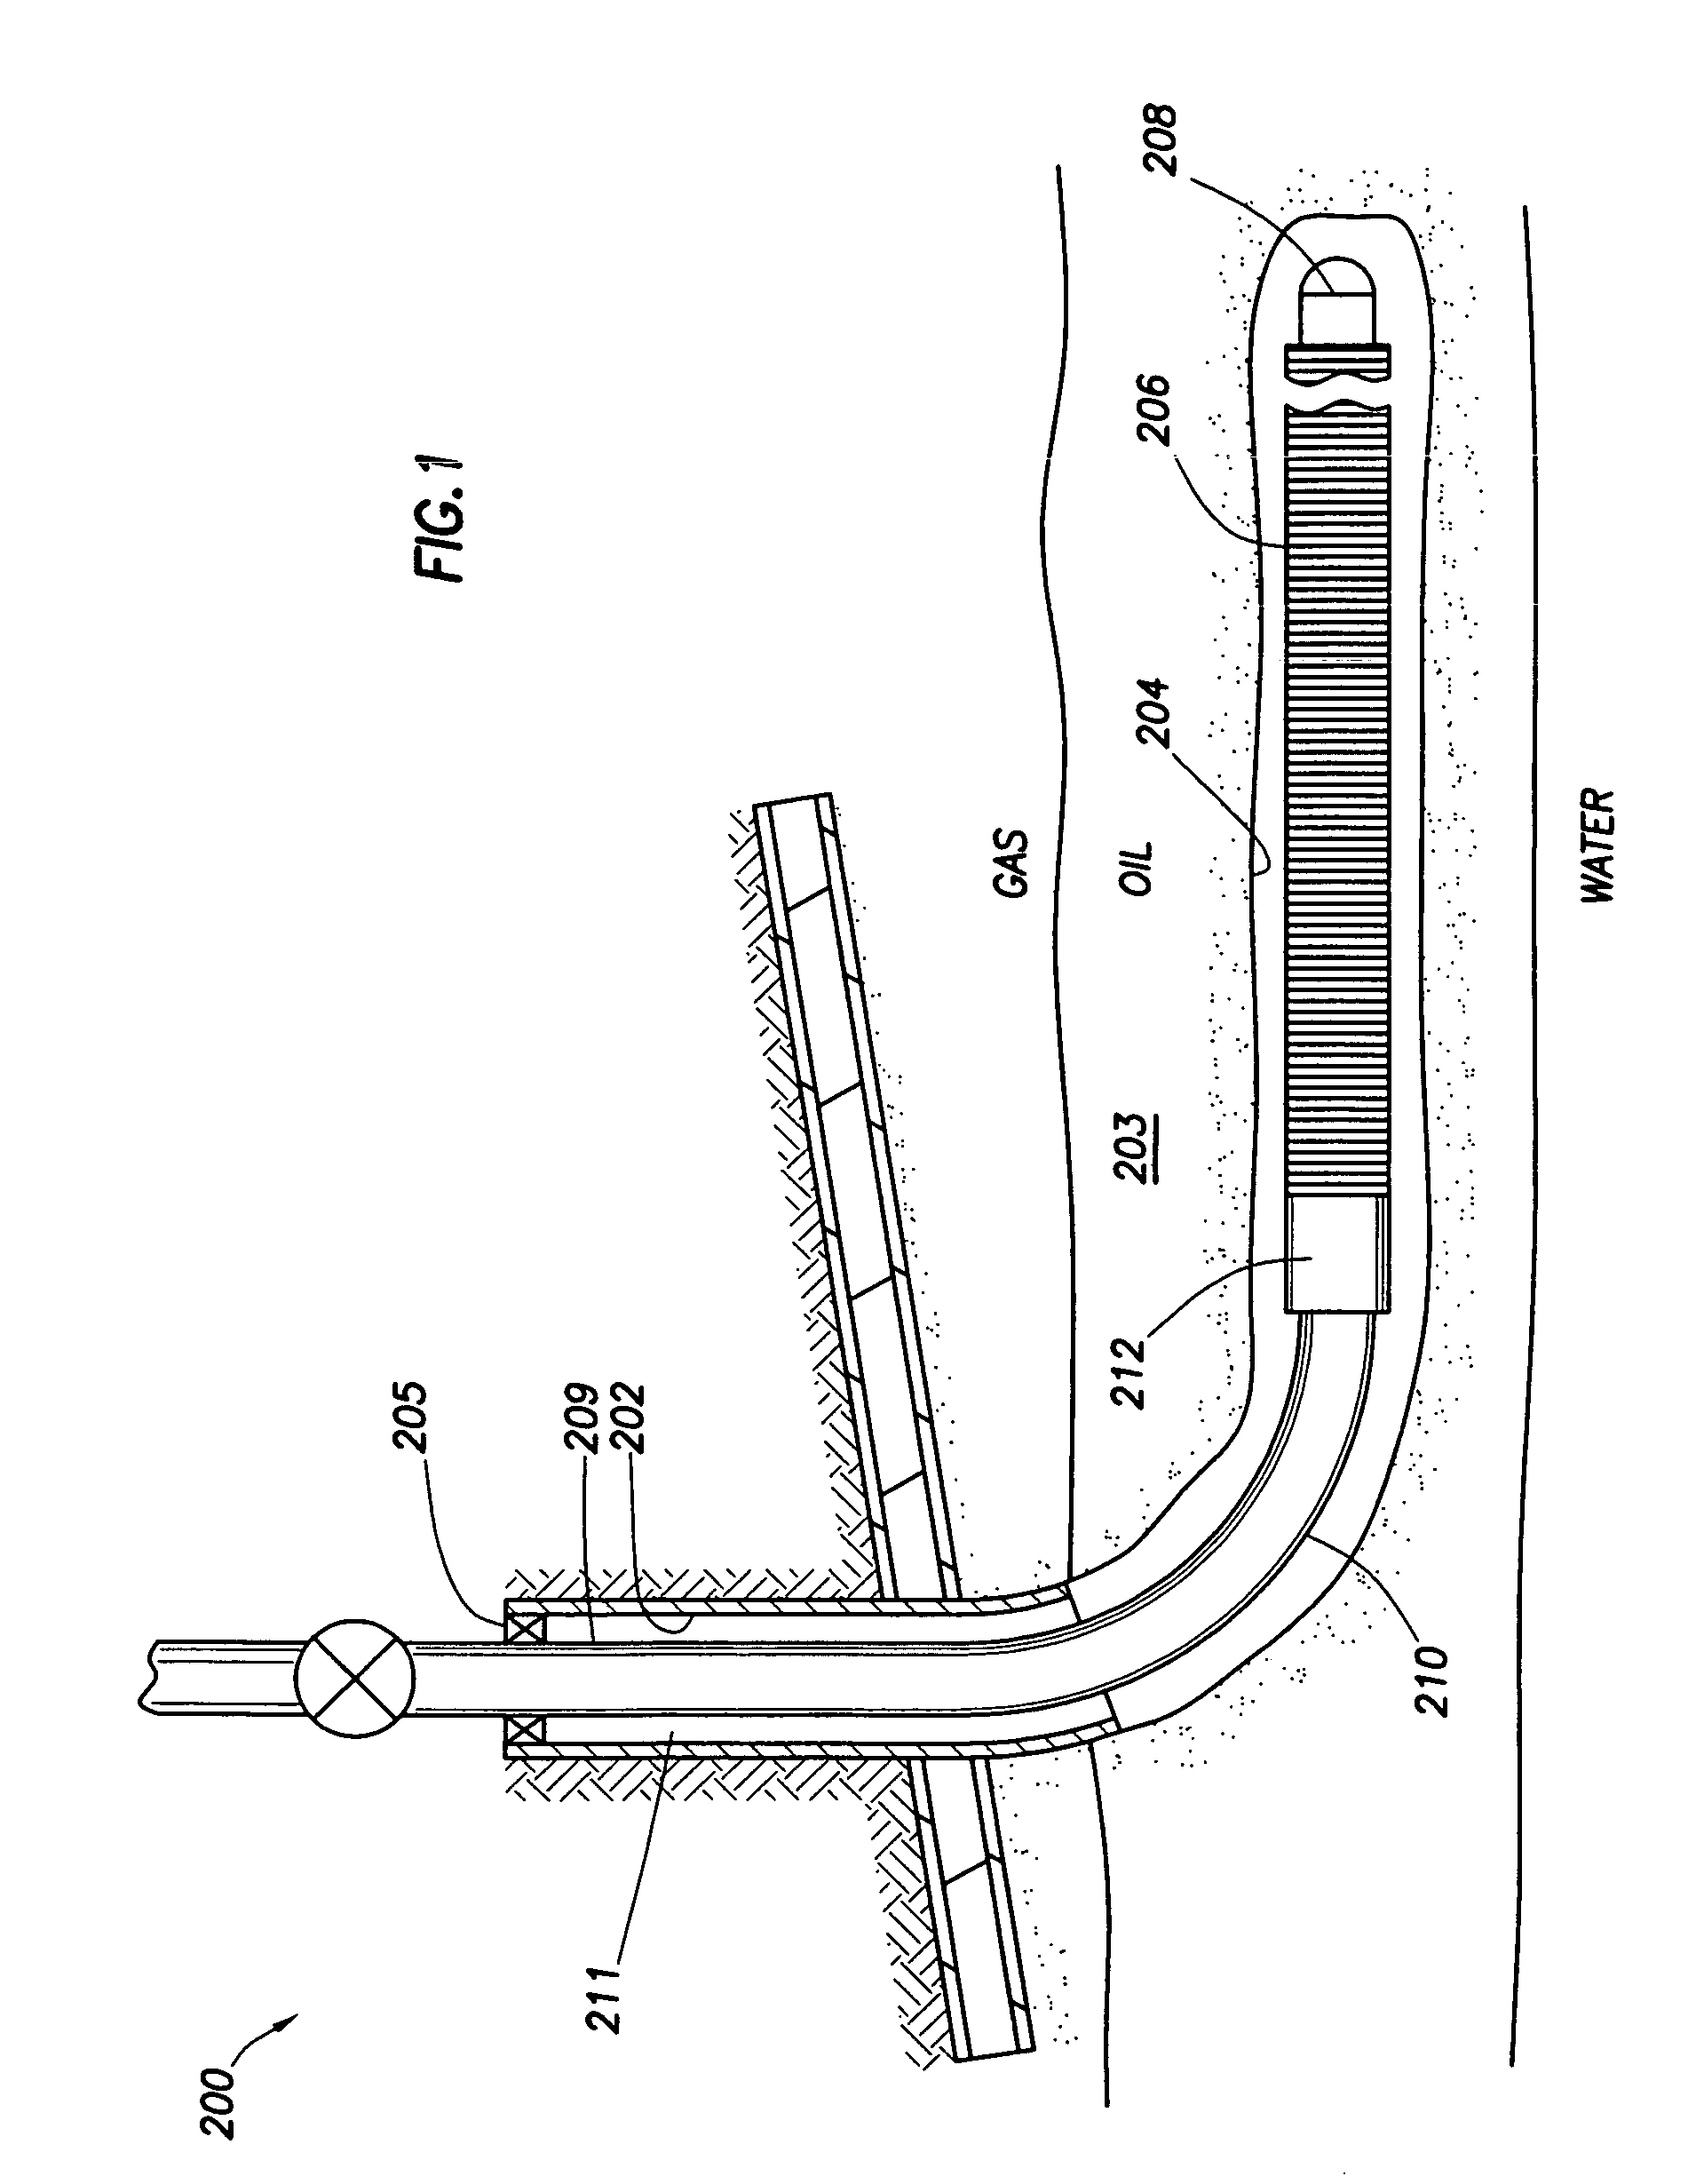 Flow control apparatus for use in a wellbore